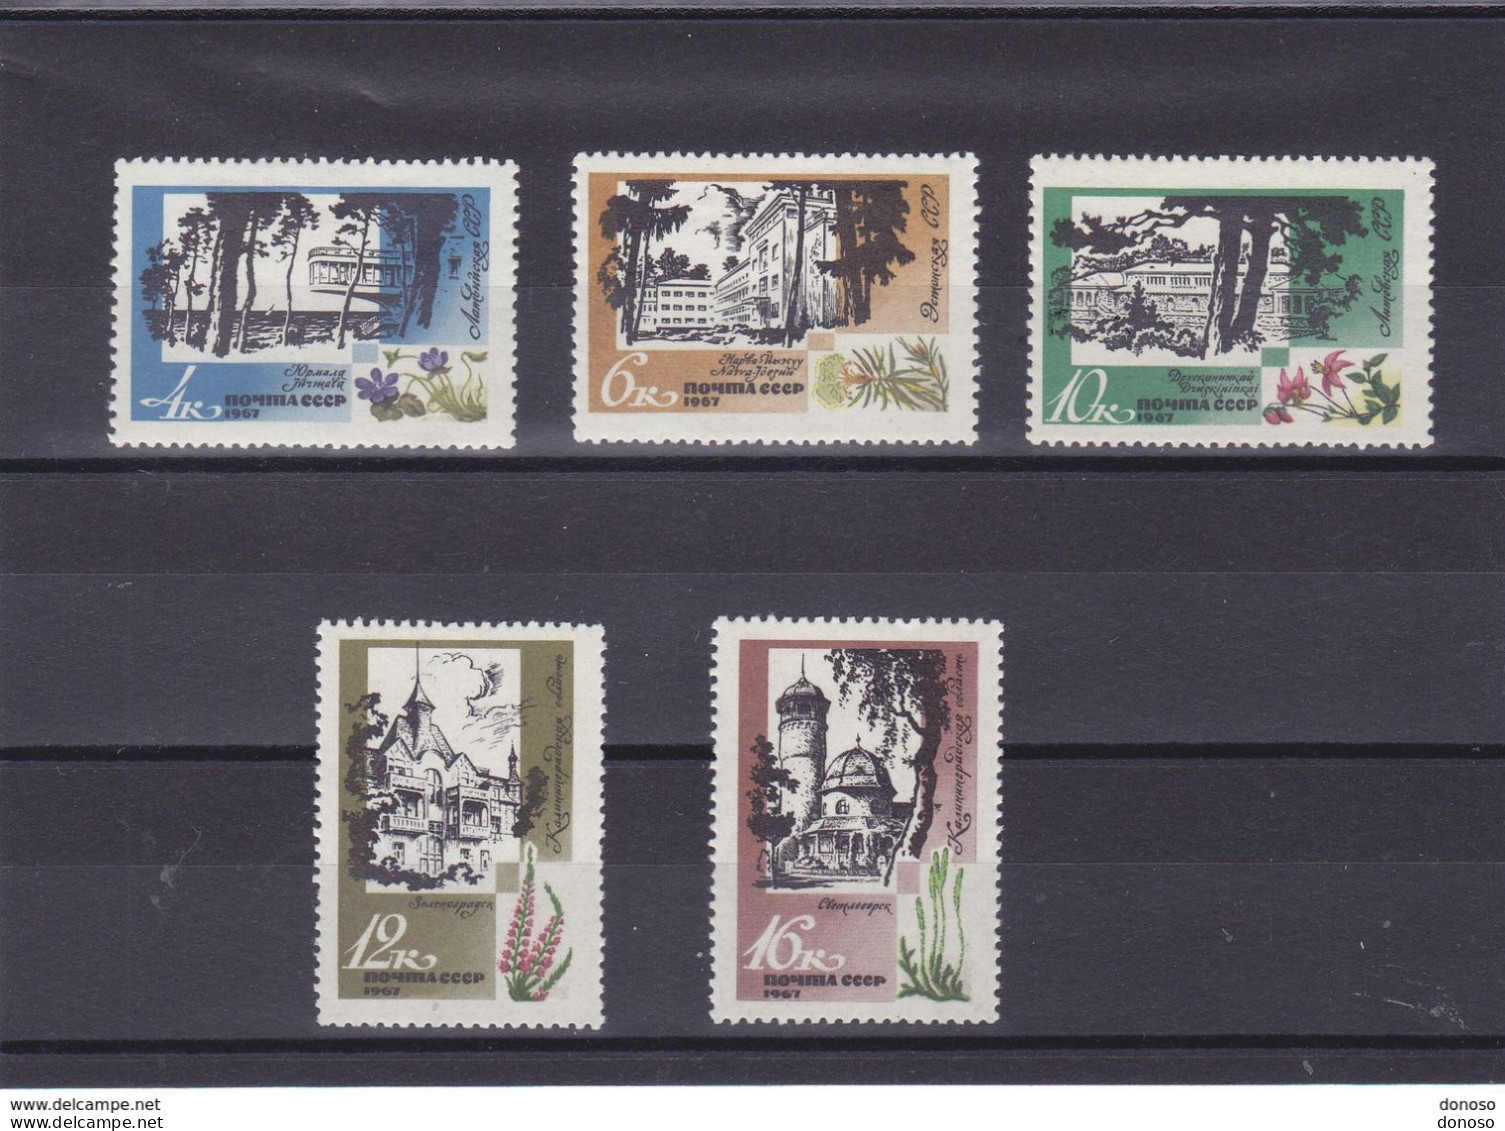 URSS 1967 STATIONS CLIMATIQUES Yvert 3299-3303, Michel 3424-3428 NEUF ** MNH Cote Yv 4 Euros - Unused Stamps